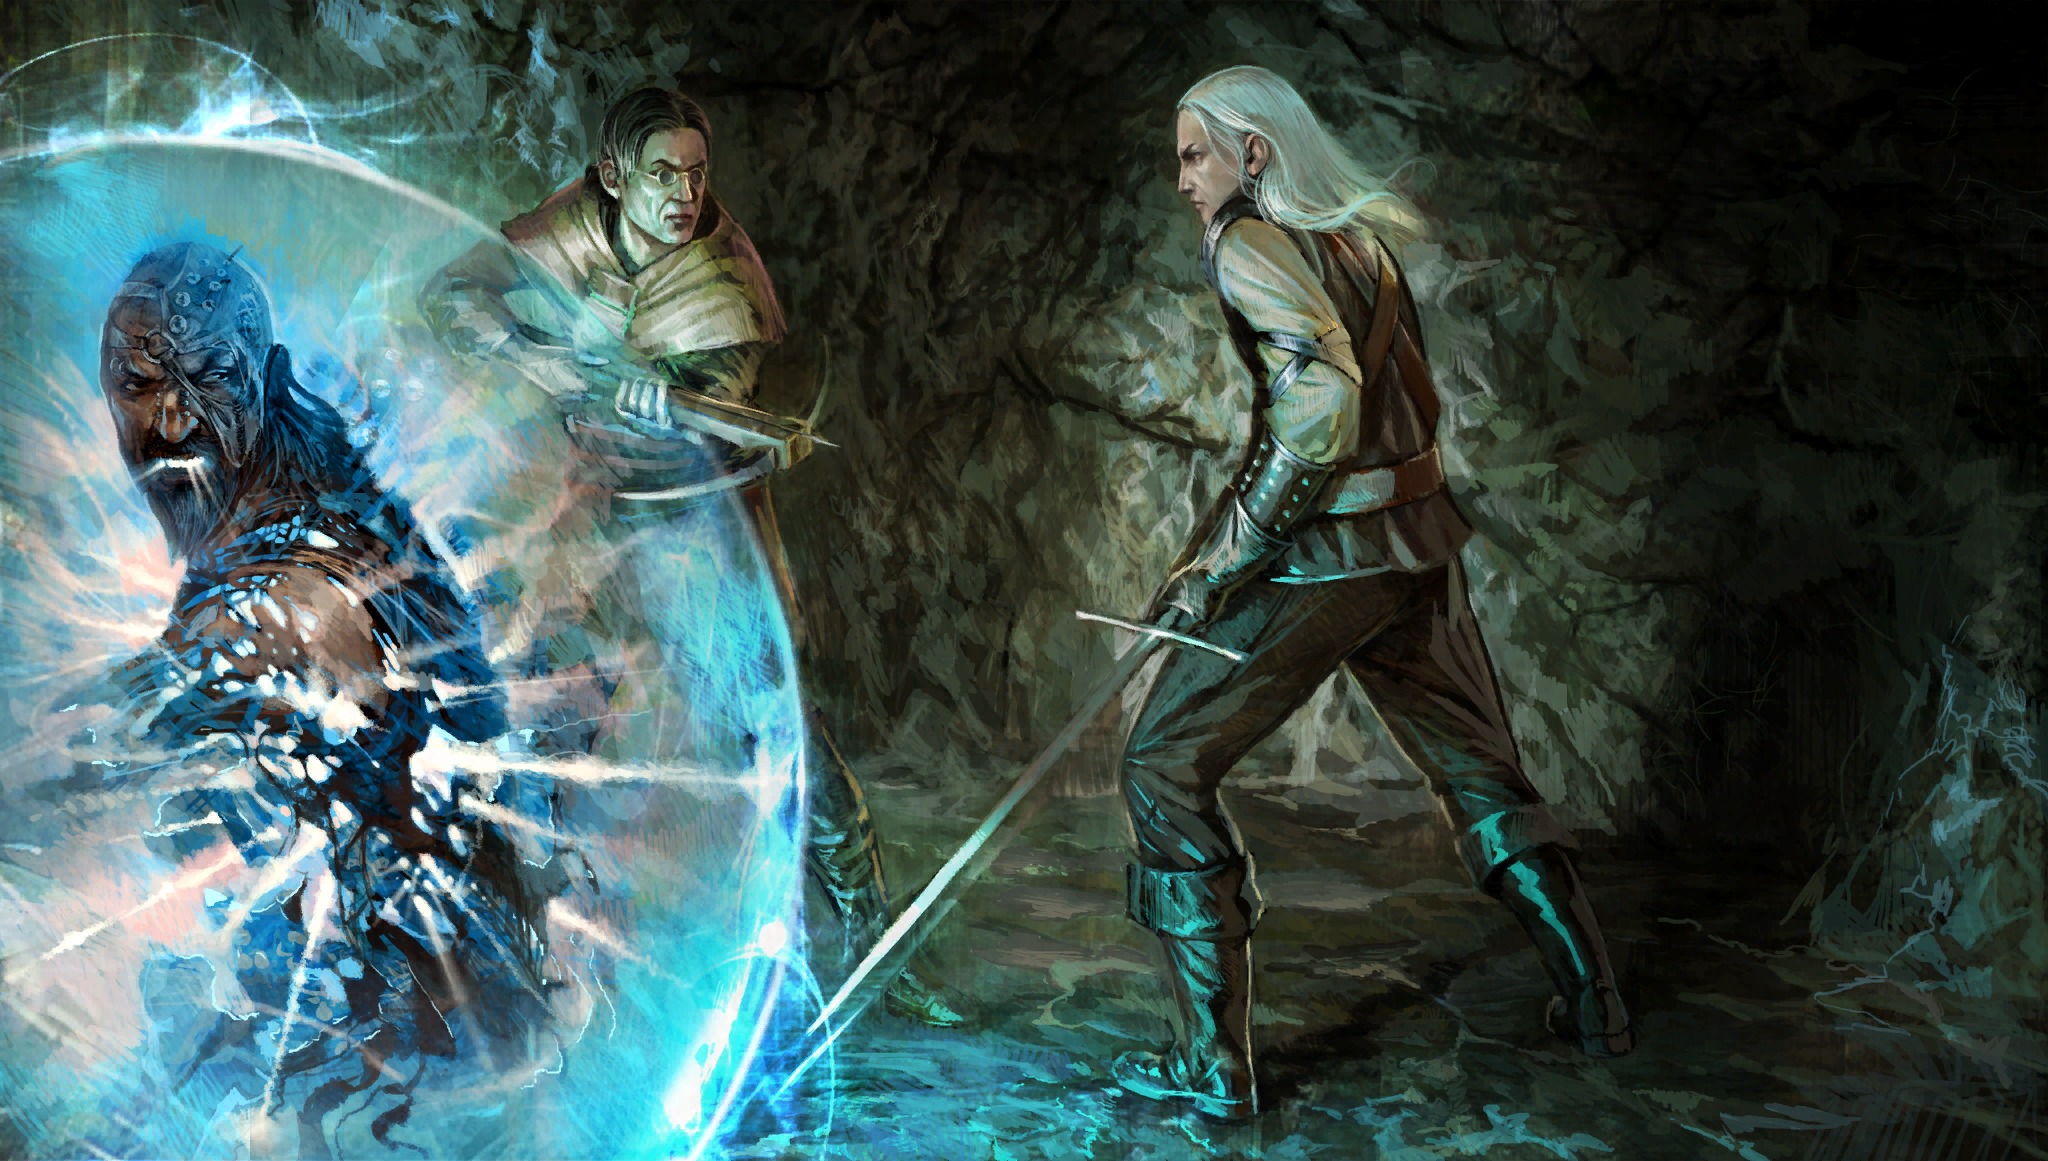 1920 x 1080 picture men, fantasy, art, witcher, cave, witch, sorcerer, crossbow